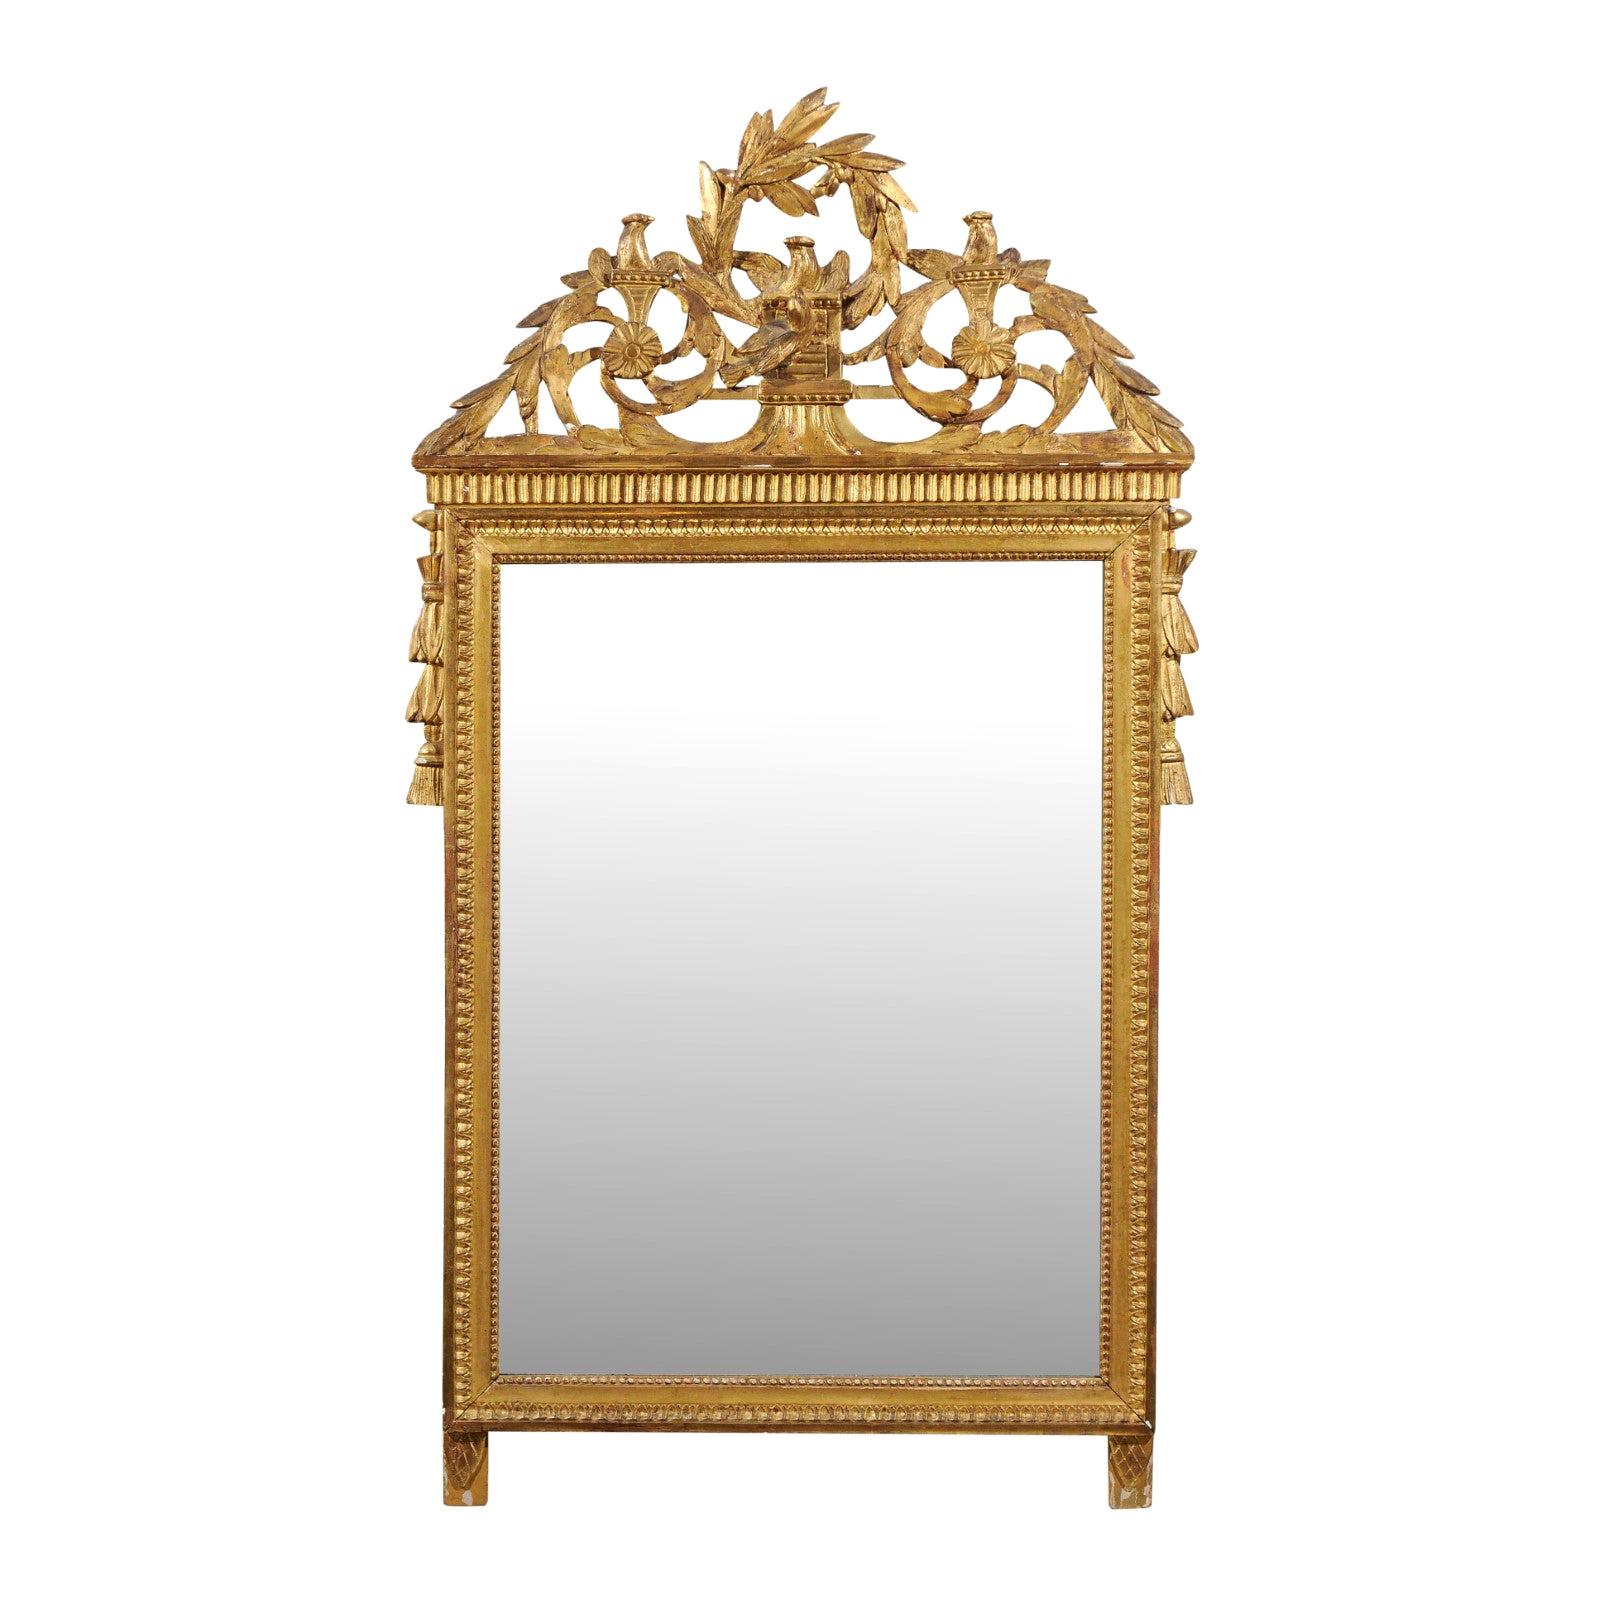 Italian 19th Century Giltwood Crested Mirror with Carved Birds and Olive Wreath